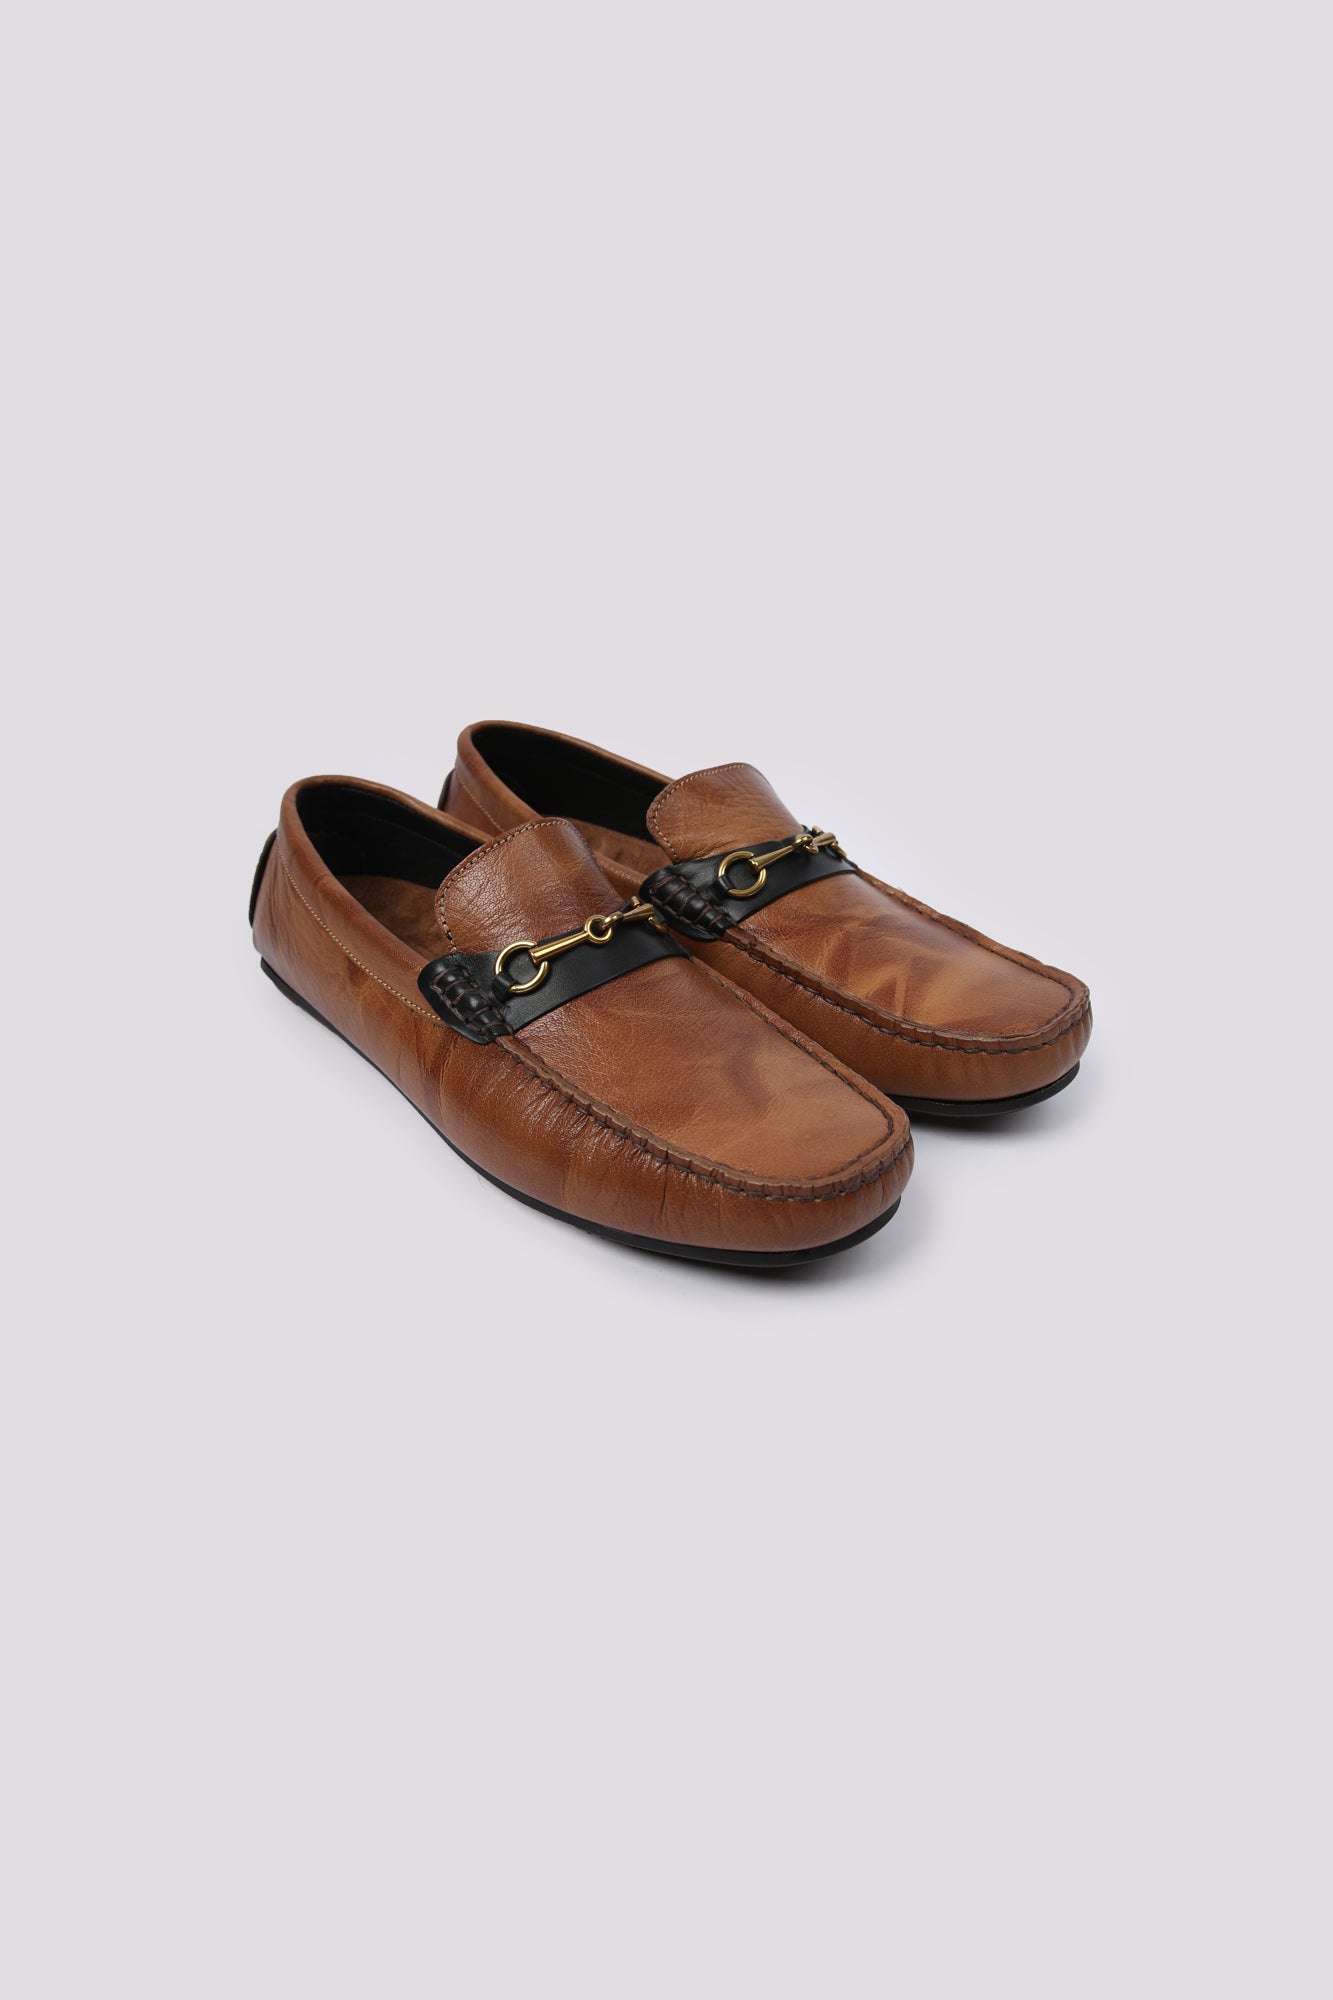 BROWN LEATHER BUCKLE SHOES